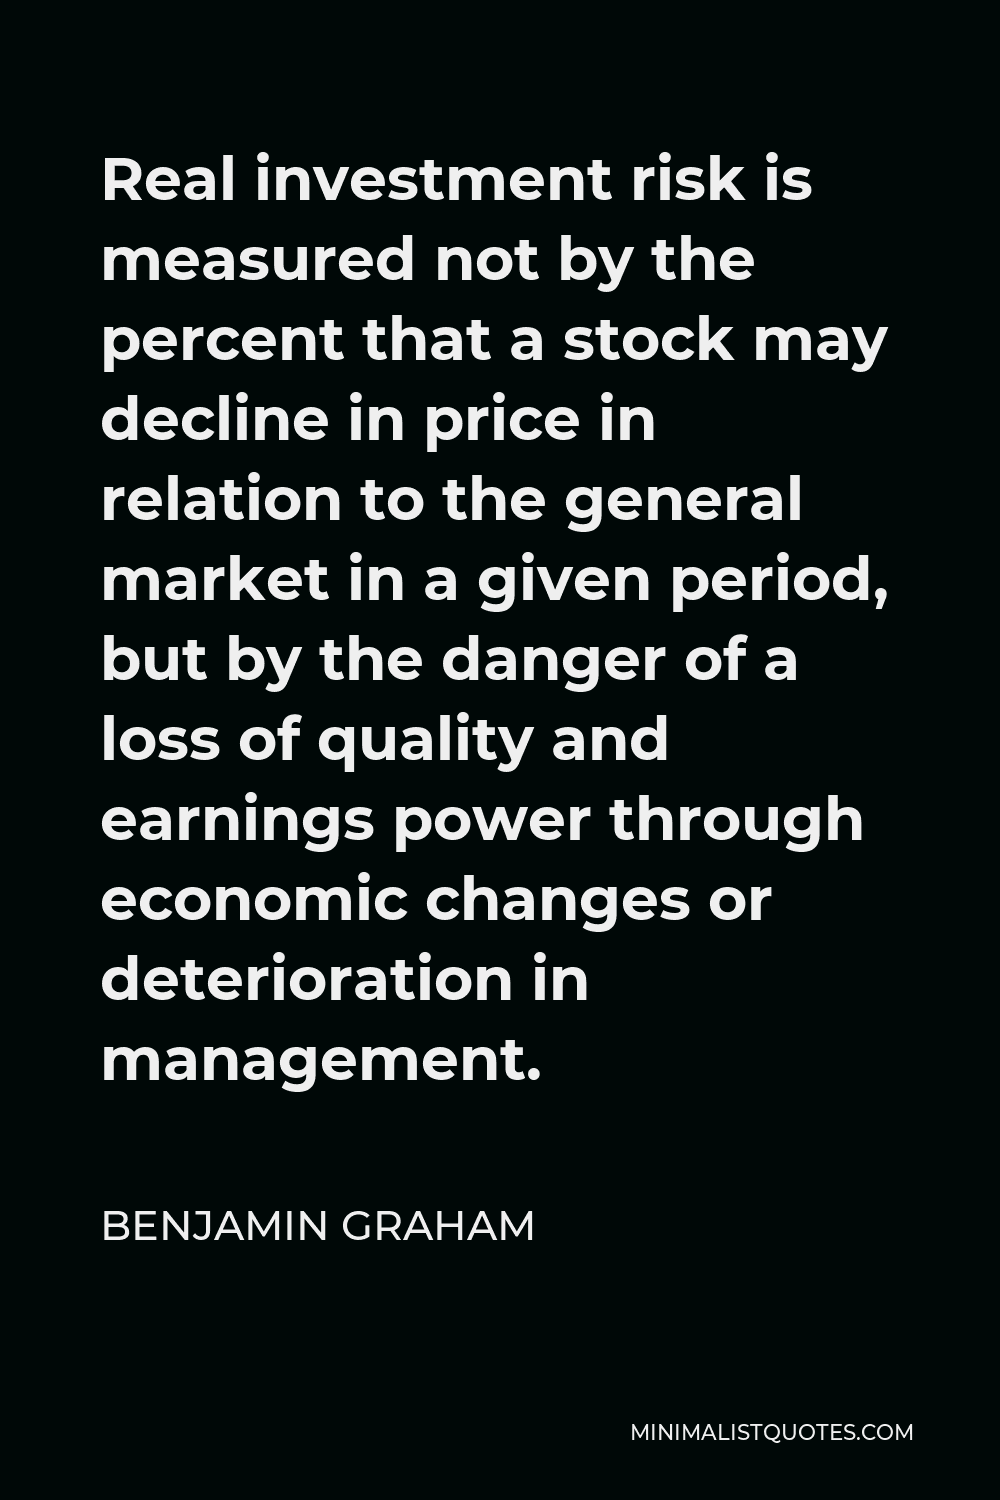 Benjamin Graham Quote - Real investment risk is measured not by the percent that a stock may decline in price in relation to the general market in a given period, but by the danger of a loss of quality and earnings power through economic changes or deterioration in management.